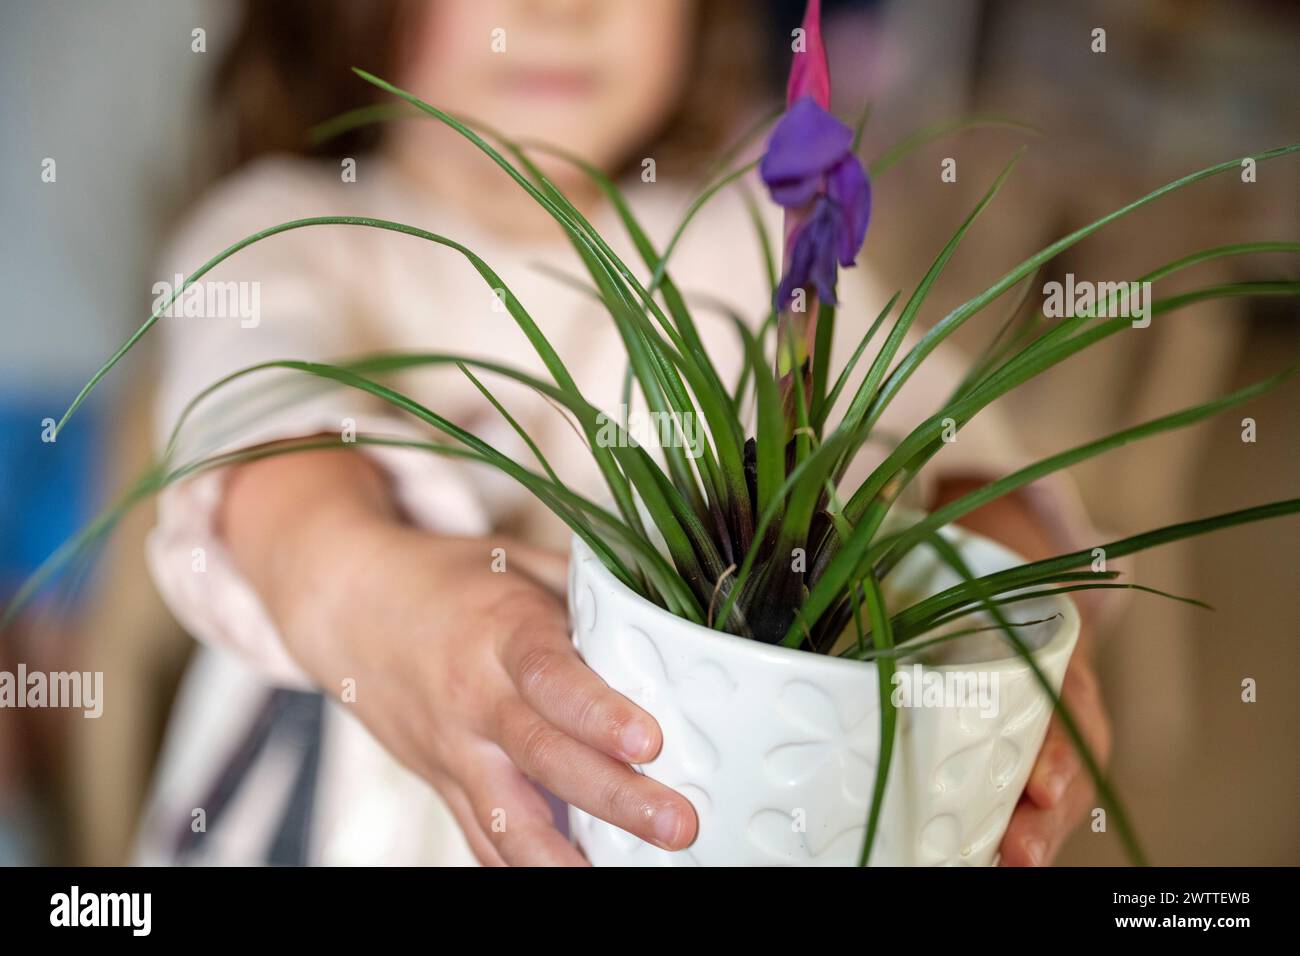 Young child presenting a potted plant with care and focus Stock Photo